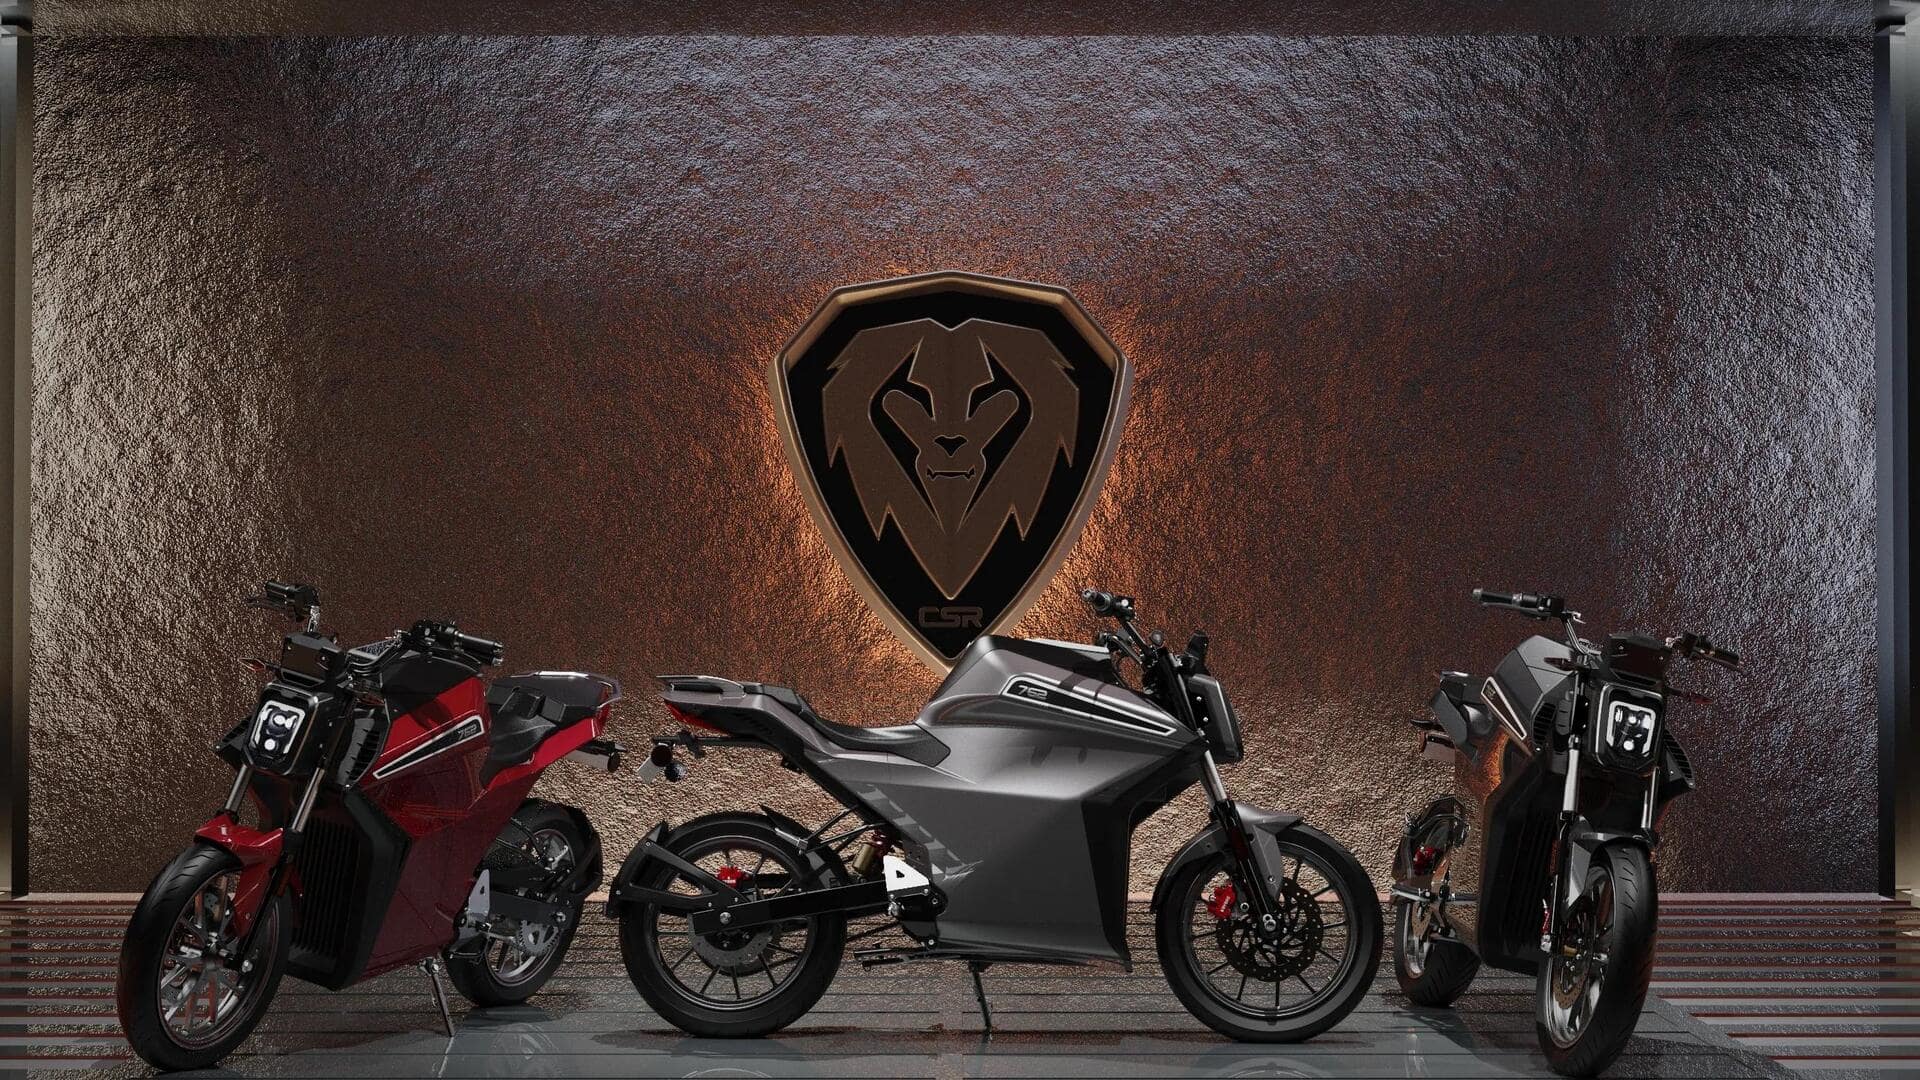 Svitch CSR 762 e-motorcycle debuts at Rs. 1.9 lakh